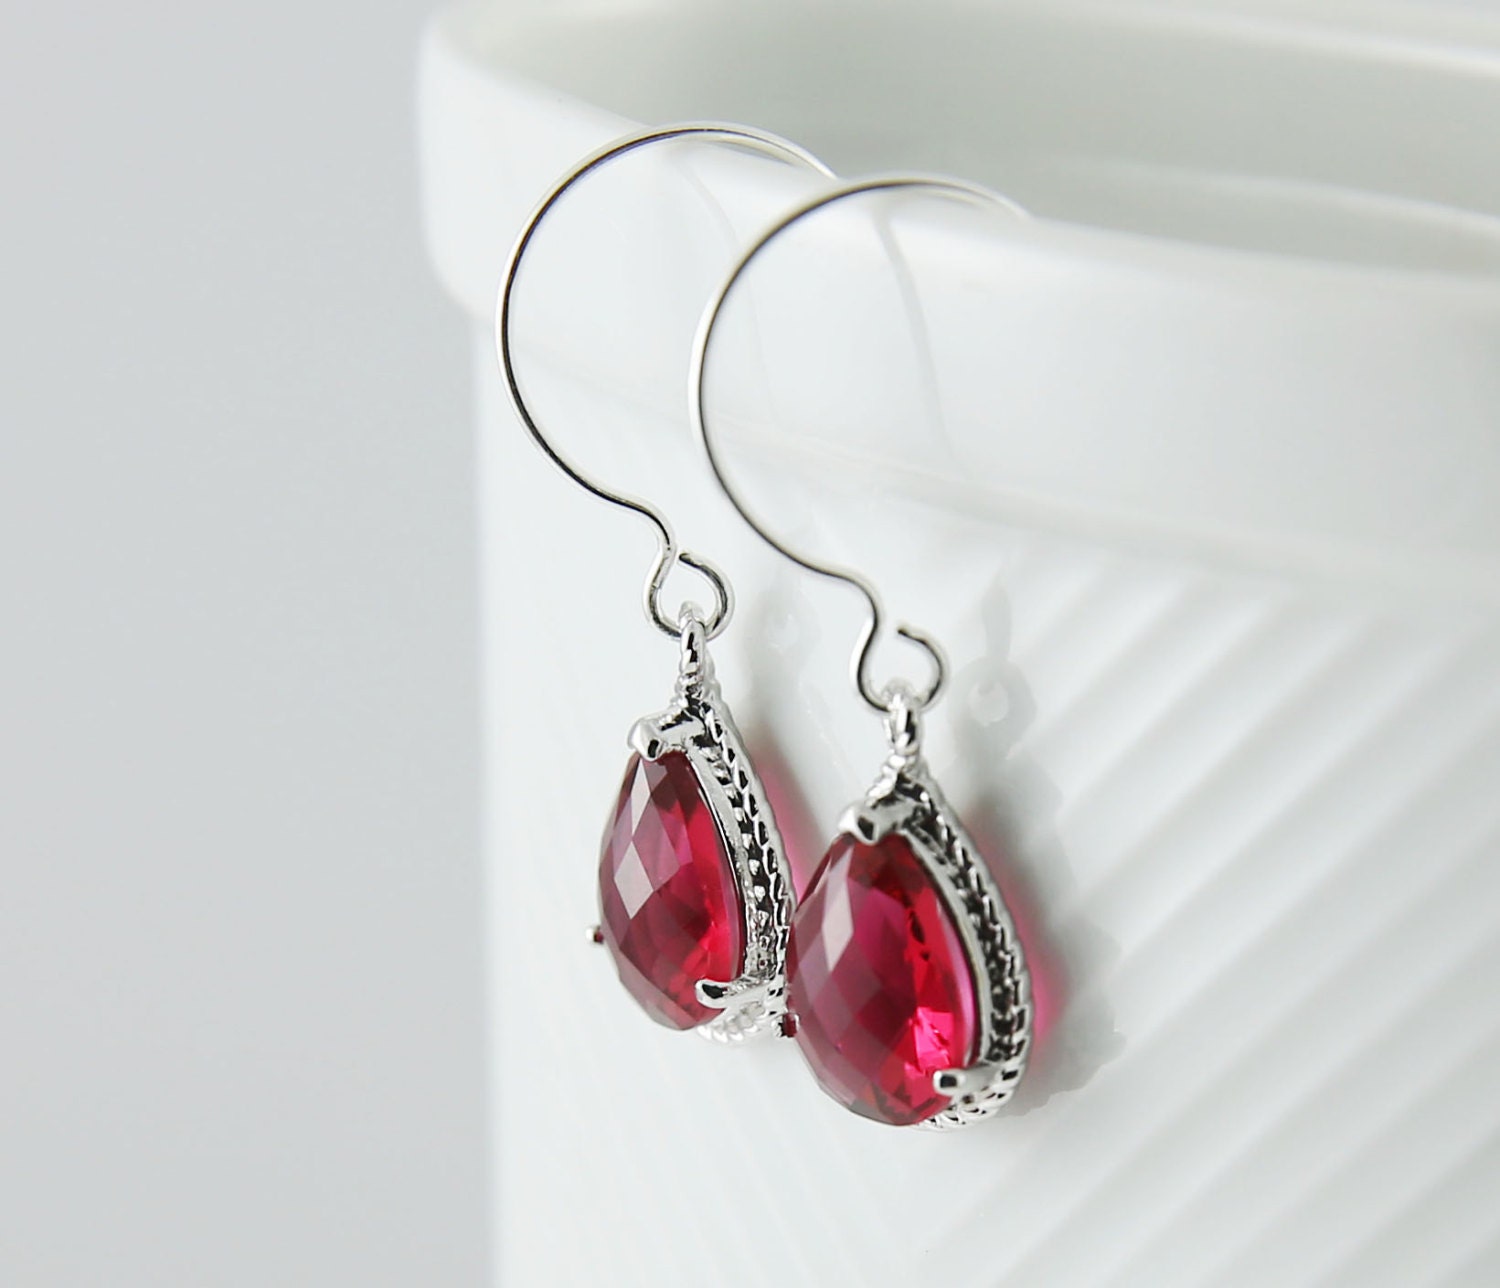 Red Glass Earrings With A Shiny Silver Tone Frame - Etsy